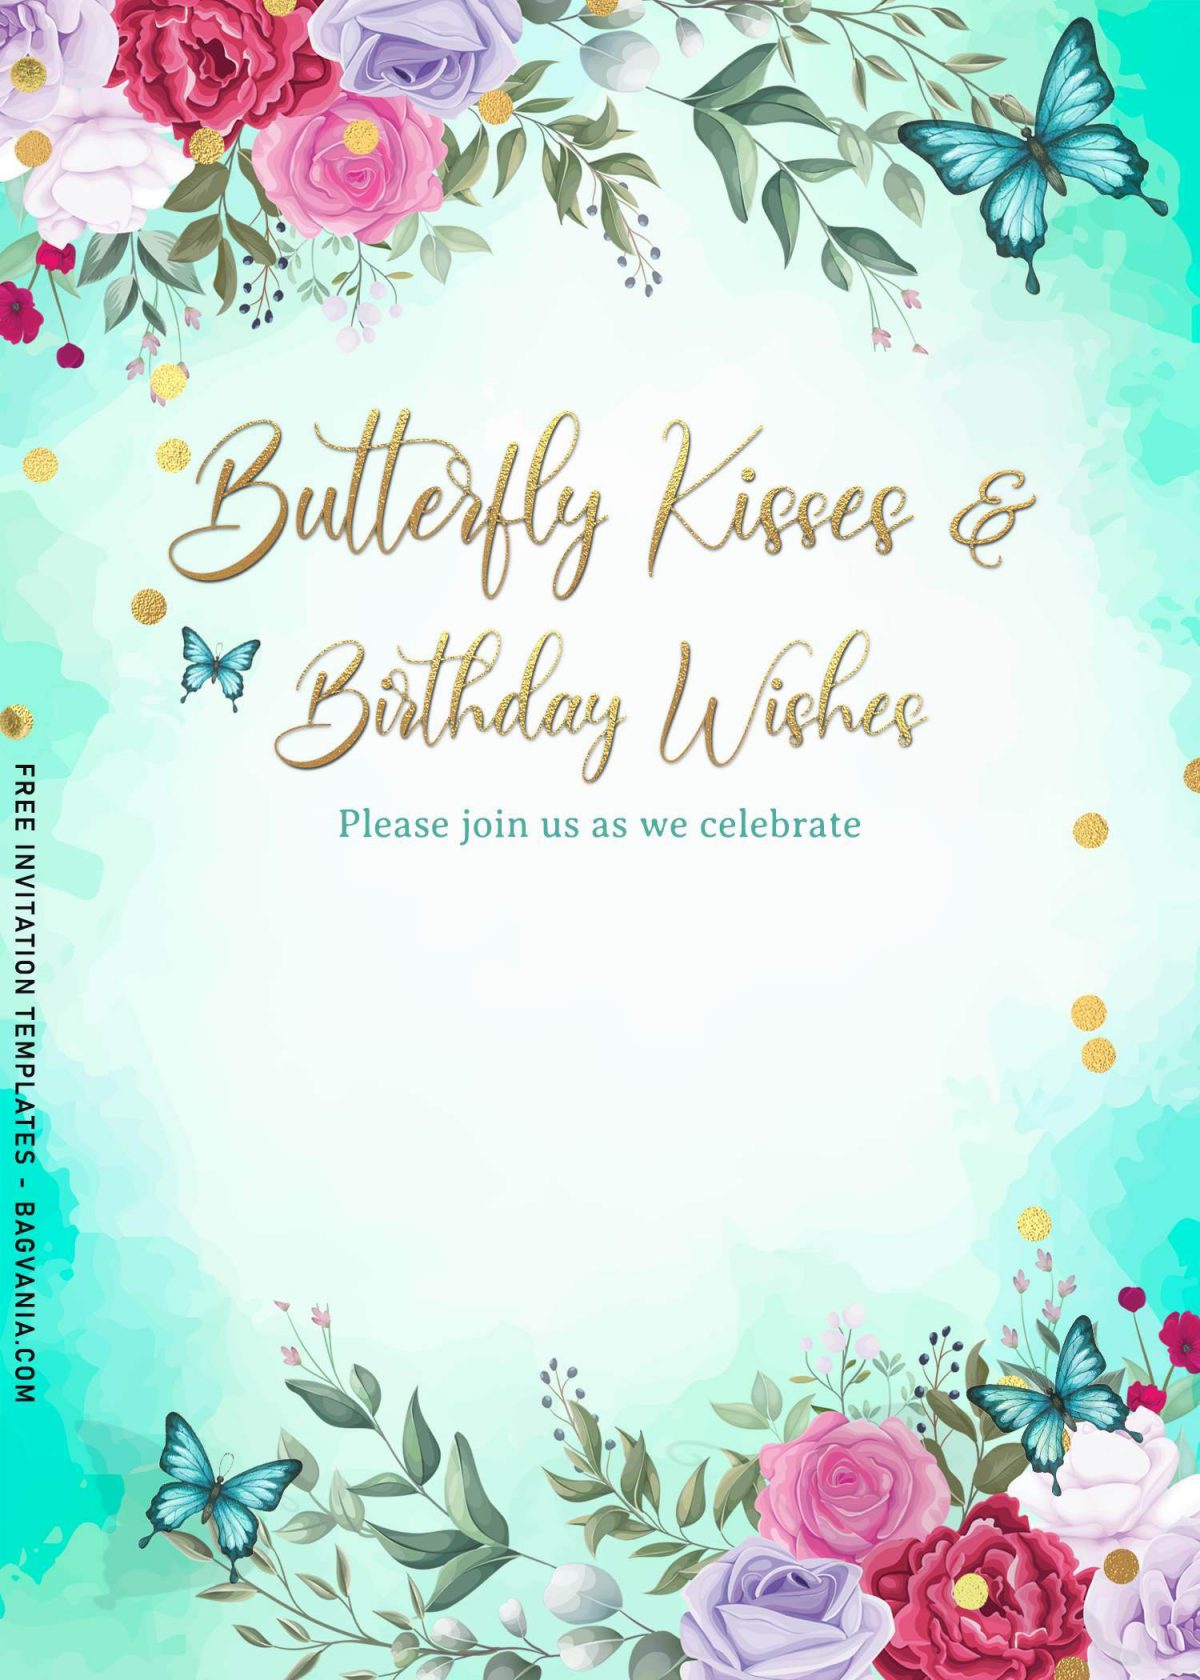 7+ Magical Watercolor Butterfly Birthday Invitation Templates and has butterfly kisses and birthday wishes text